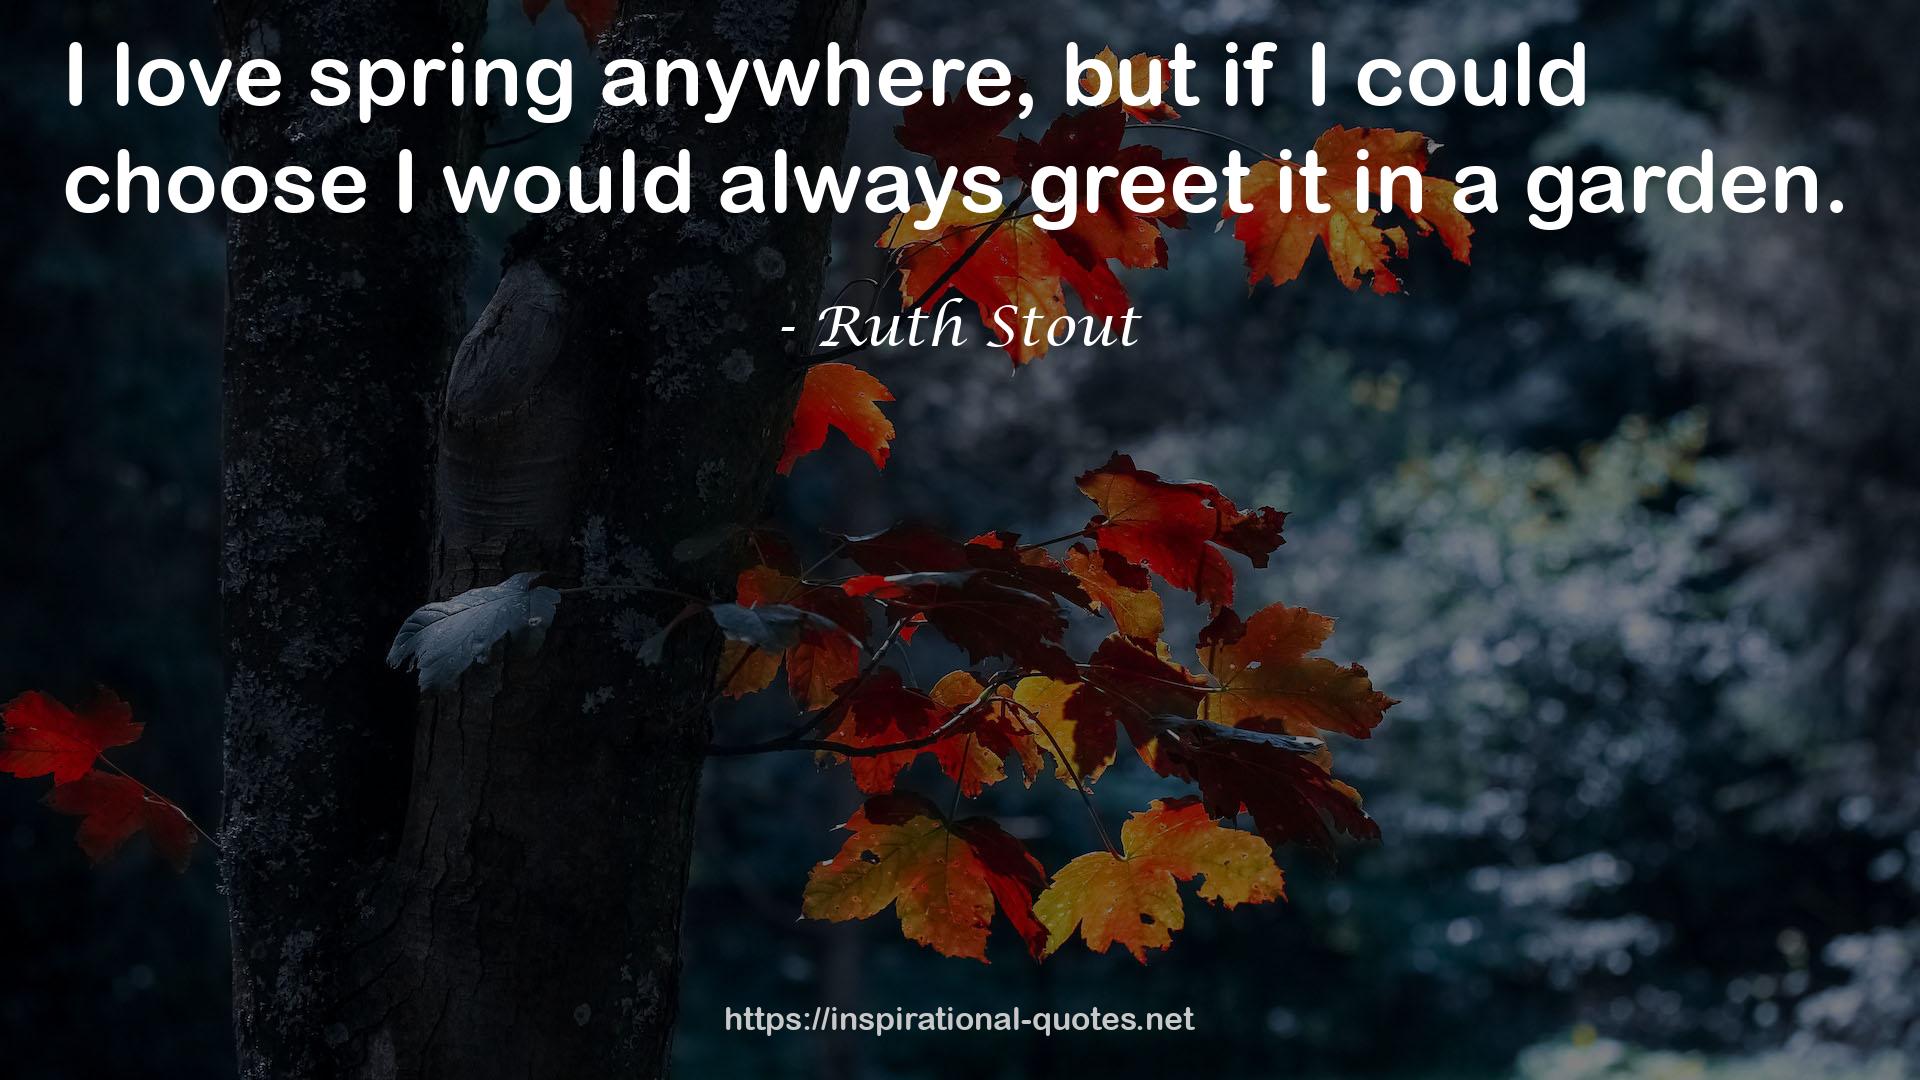 Ruth Stout QUOTES